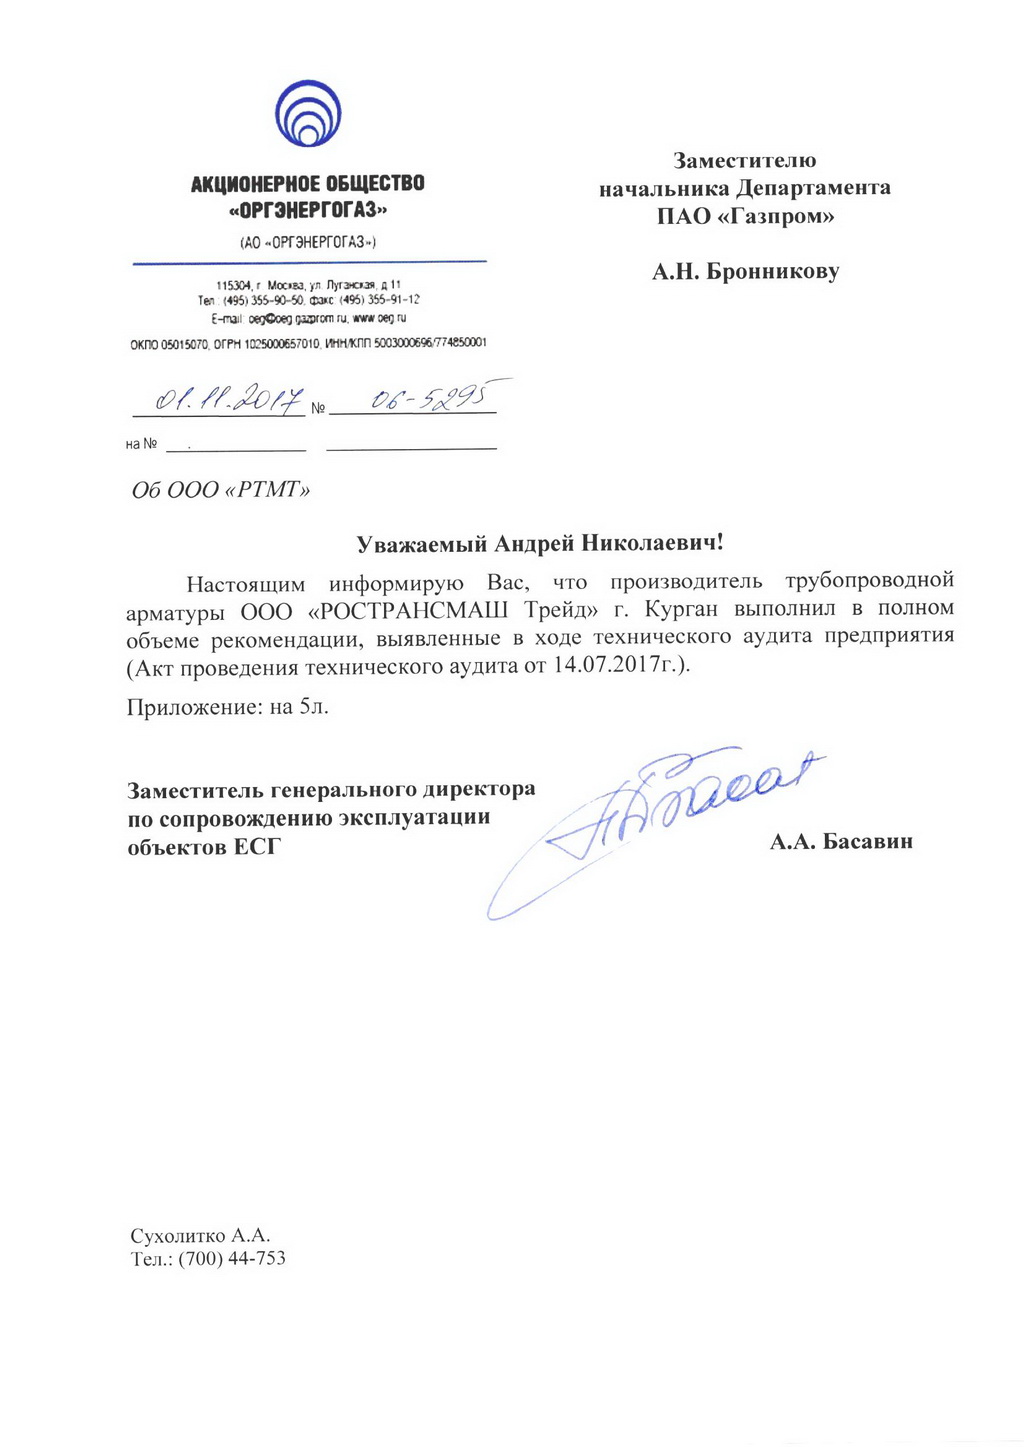 All Gazprom's recommendations have been implemented